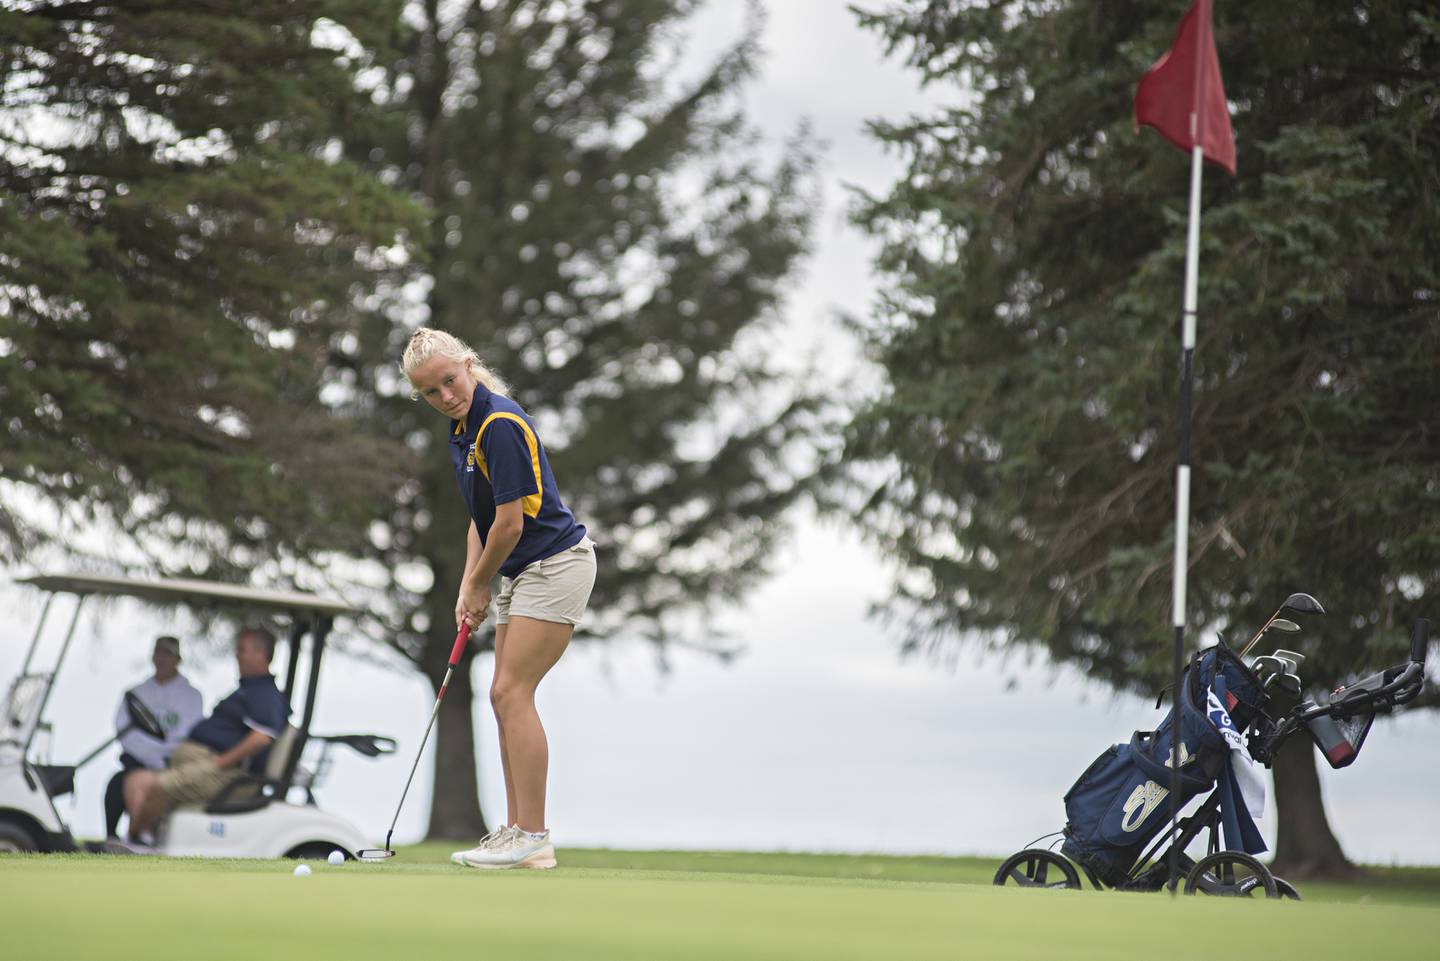 Polo's Kamryn Stockton putts on #3 during the girls class A sectionals Monday, Oct. 4, 2021 at Kewanee Dunes.